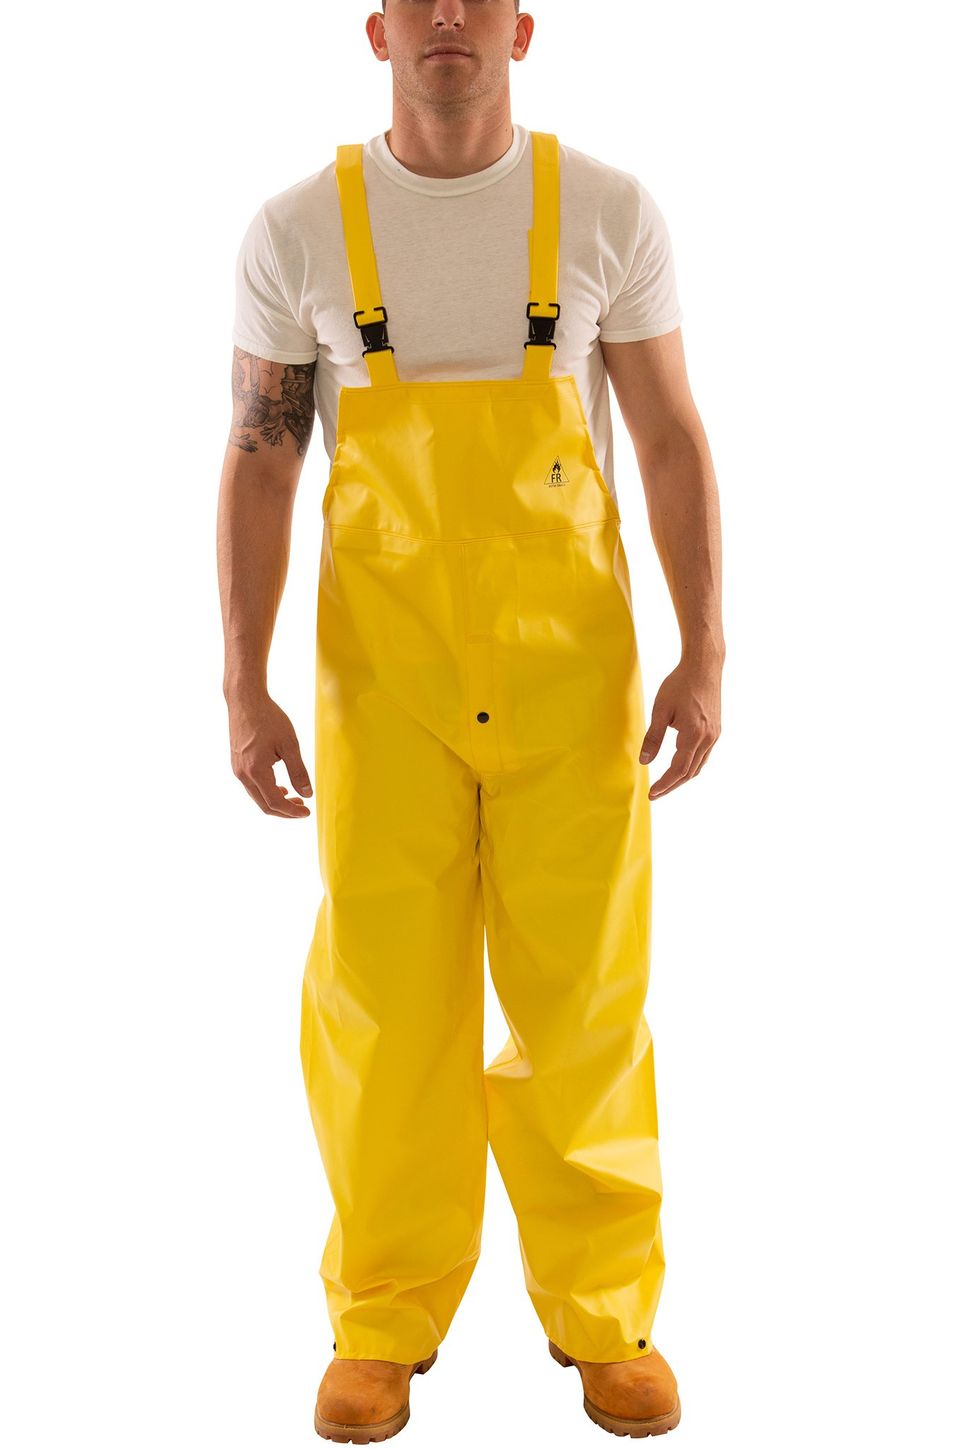 Rebel Thermoskin One-Piece Freezer Suit - ZDI - Safety PPE